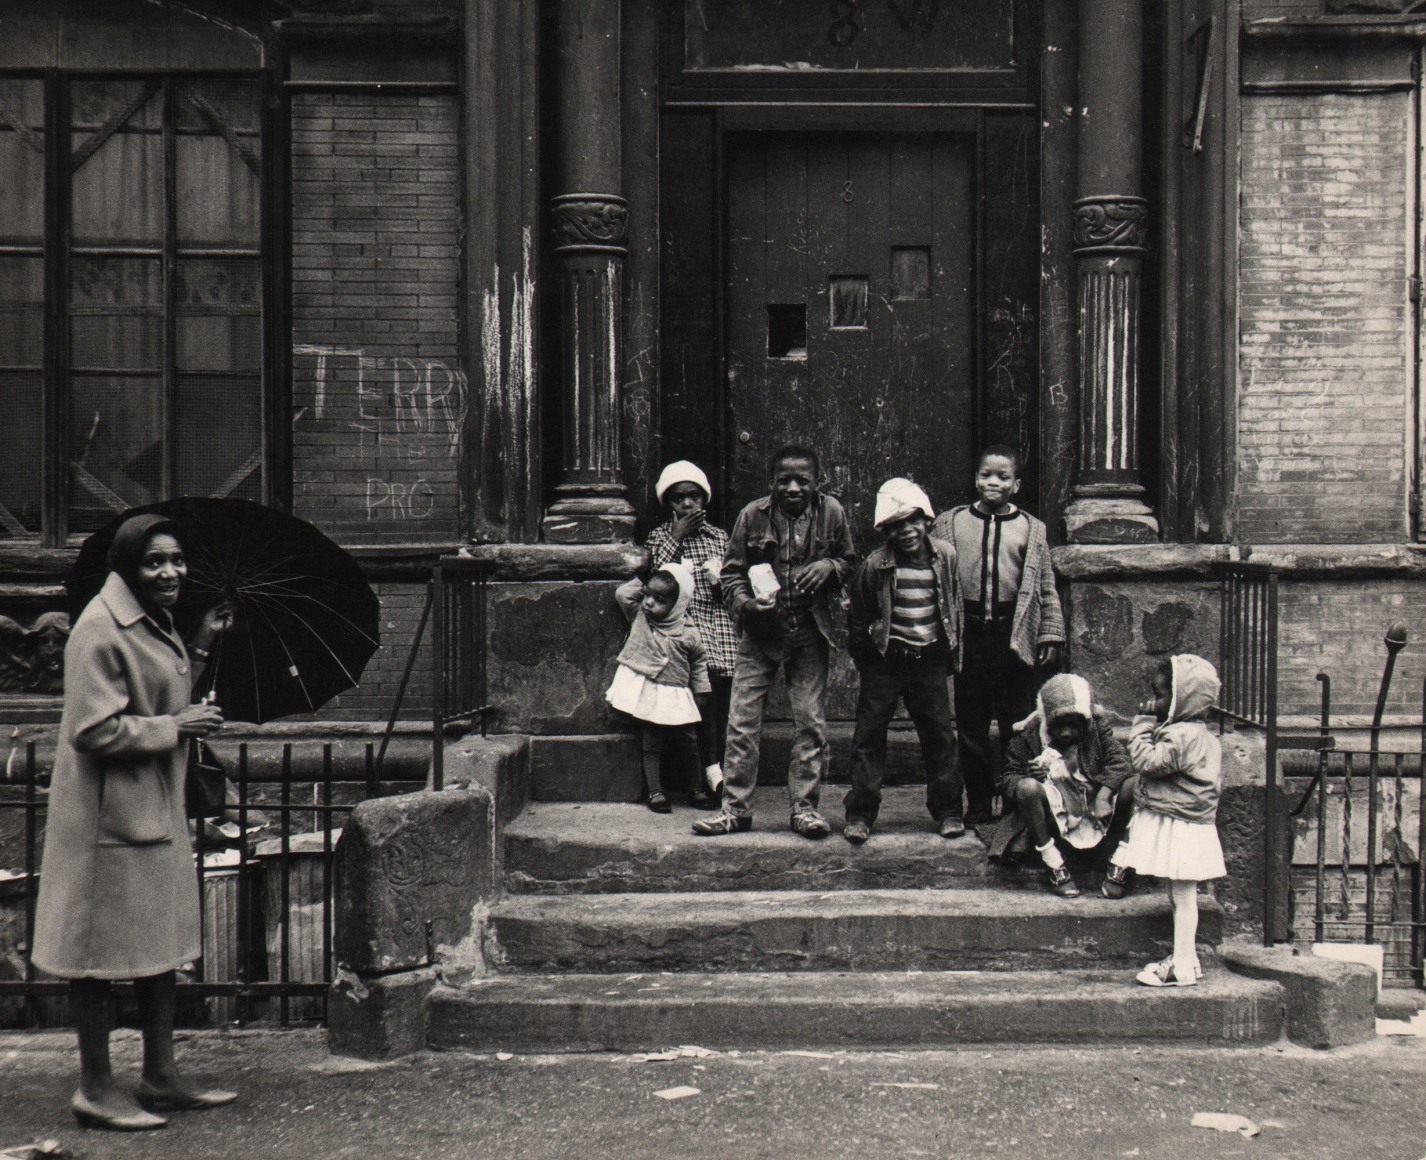 25. Beuford Smith, Harlem Children, Easter Sunday, ​1965. Seven children lined up on a stoop; a smiling woman holding an umbrella stands in the lower left of the frame.